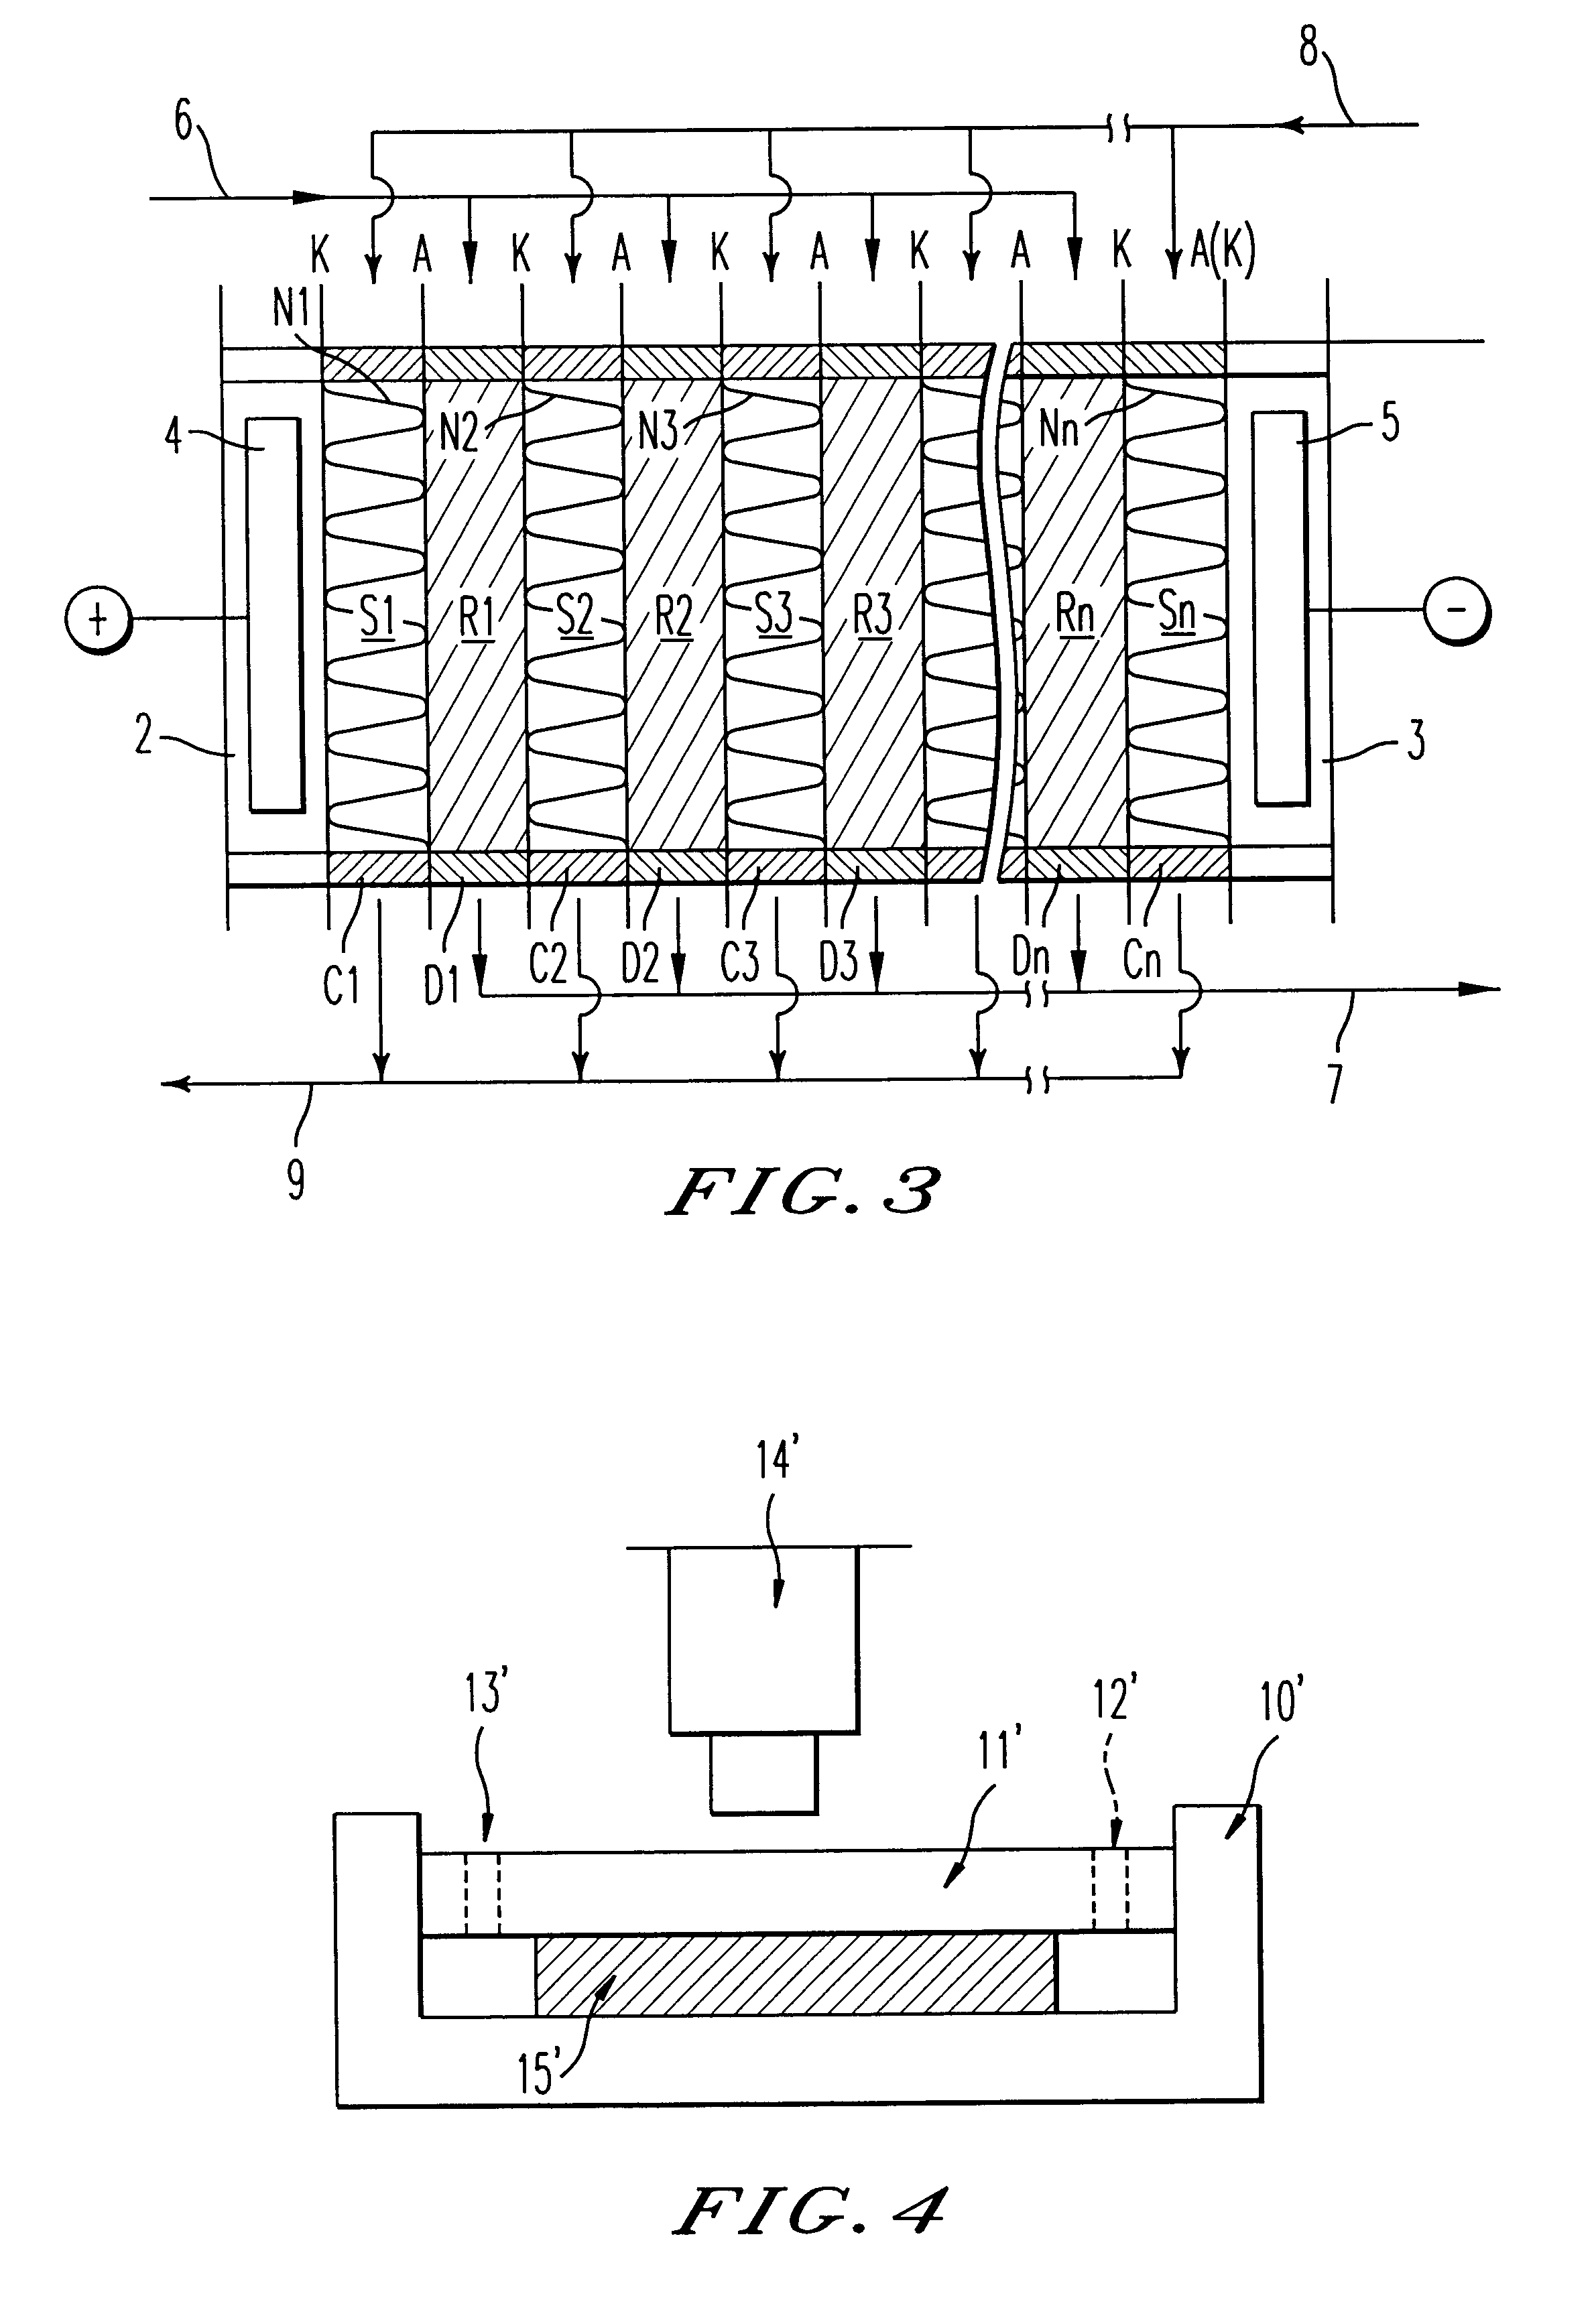 Method and apparatus for producing deionized water